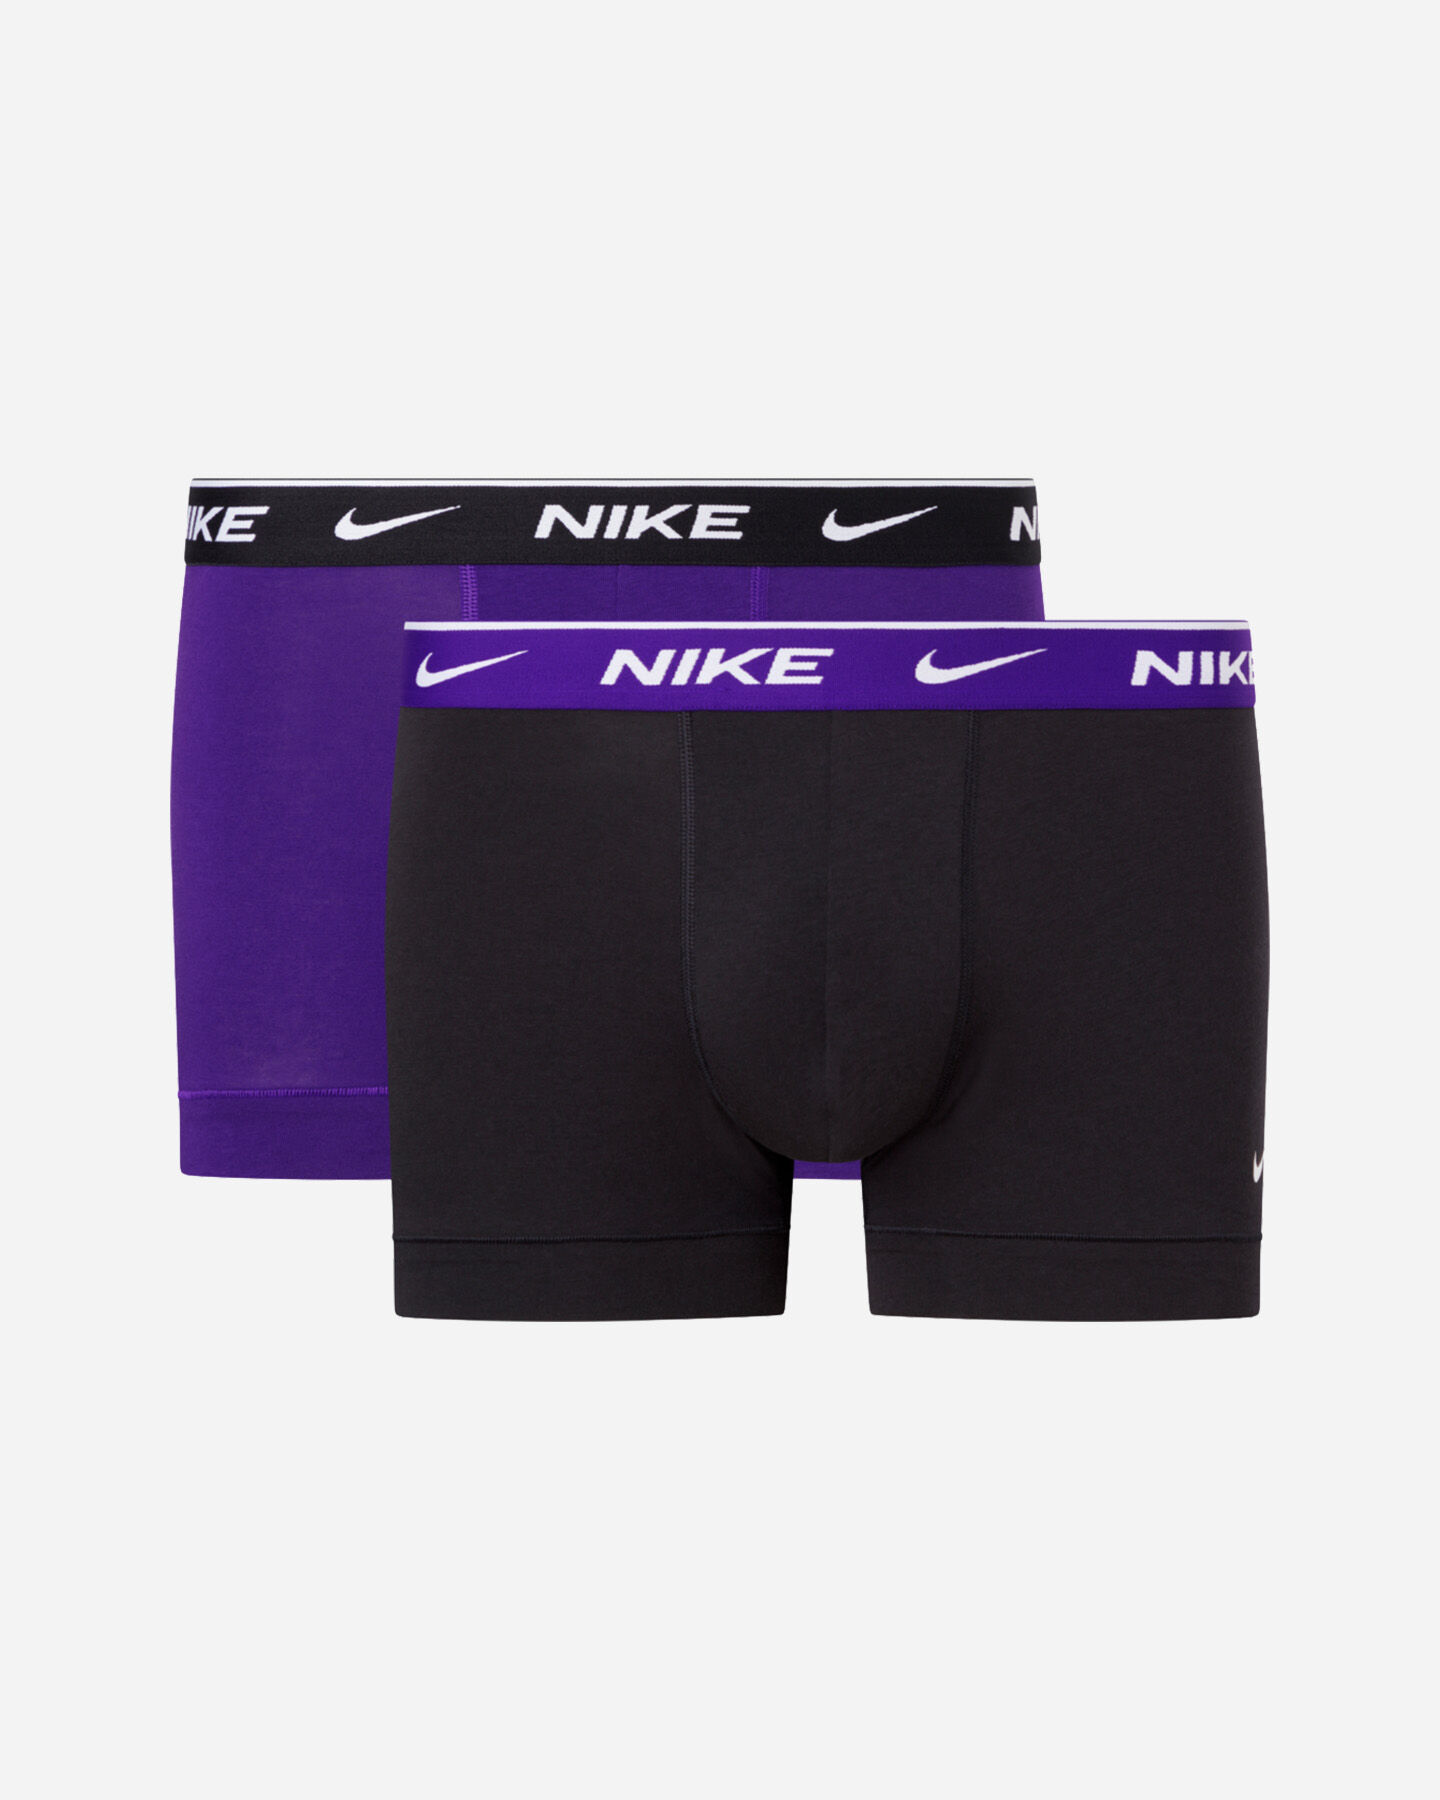  Intimo NIKE 2 PACK BOXER EVERYDAY COTTON STRETCH M S4110504|1ME|XL scatto 0